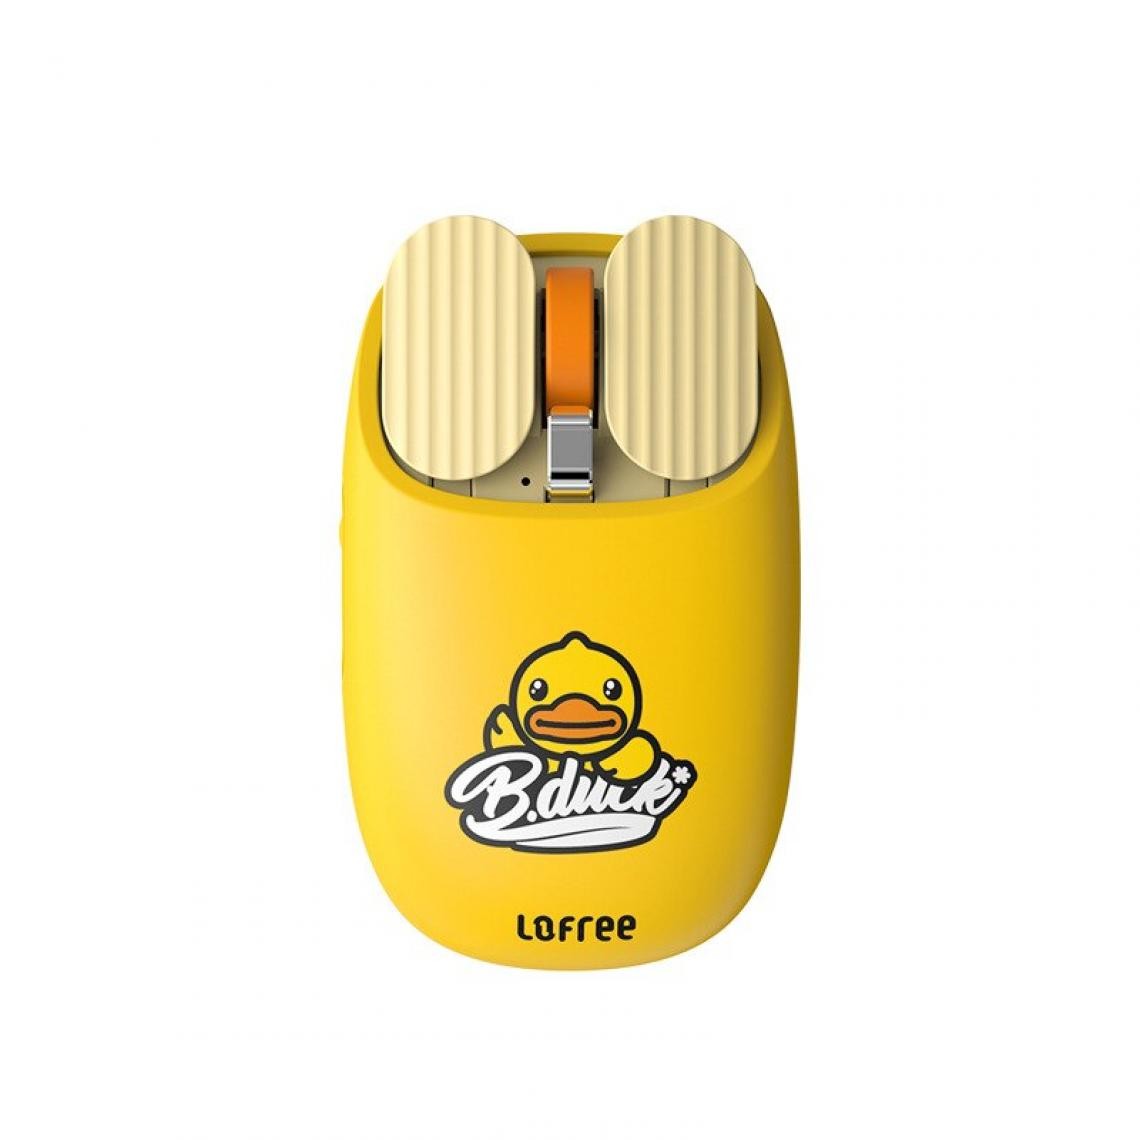 Universal - Yellow Duck Bluetooth Mouse Wireless Home Office Games Adorable Mouse, EP115 Mouse(Jaune) - Souris